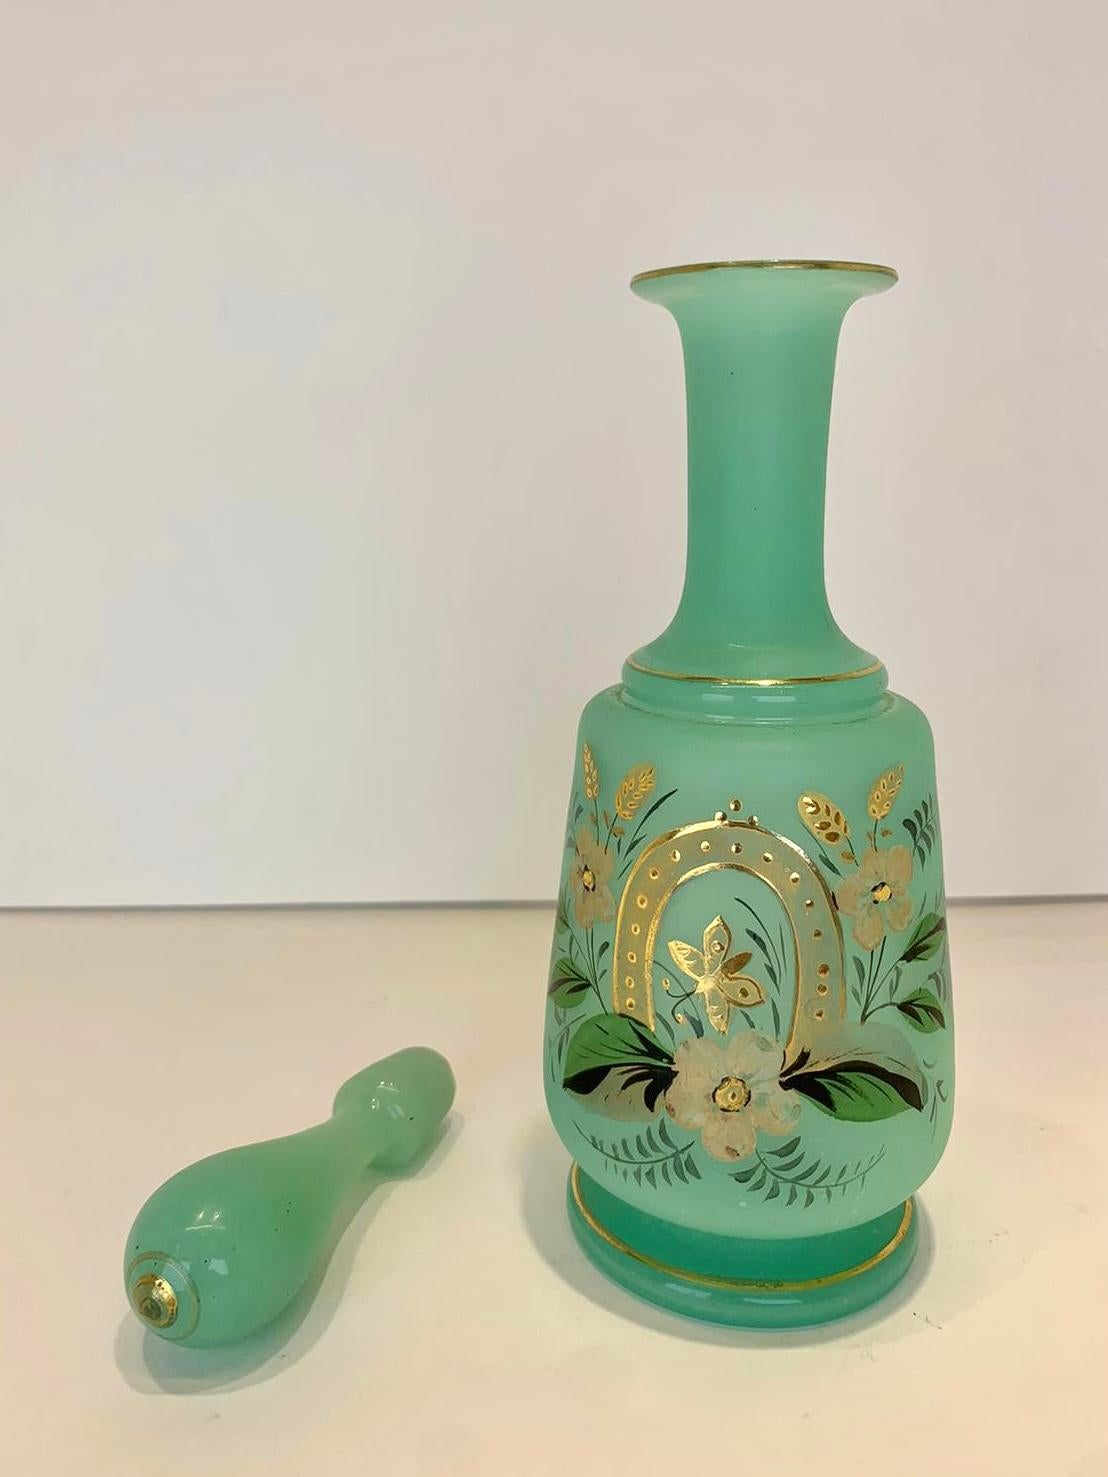 Antique Green Opaline Enameled Glass Perfume Bottle, Flacon, 19th Century In Good Condition For Sale In Rostock, MV